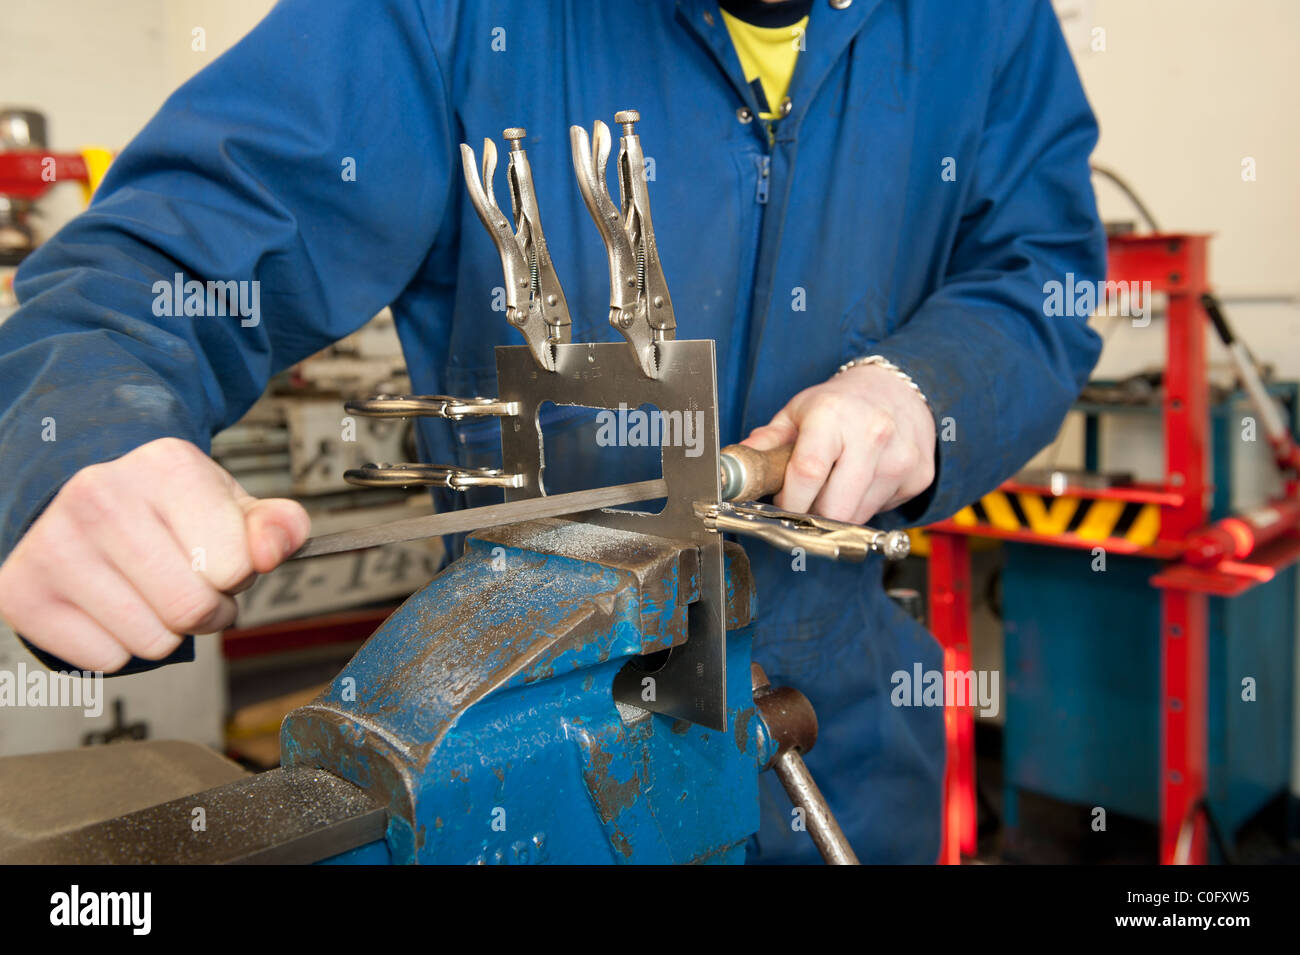 Adults learning metal working skills at a college of further education, Uk Stock Photo